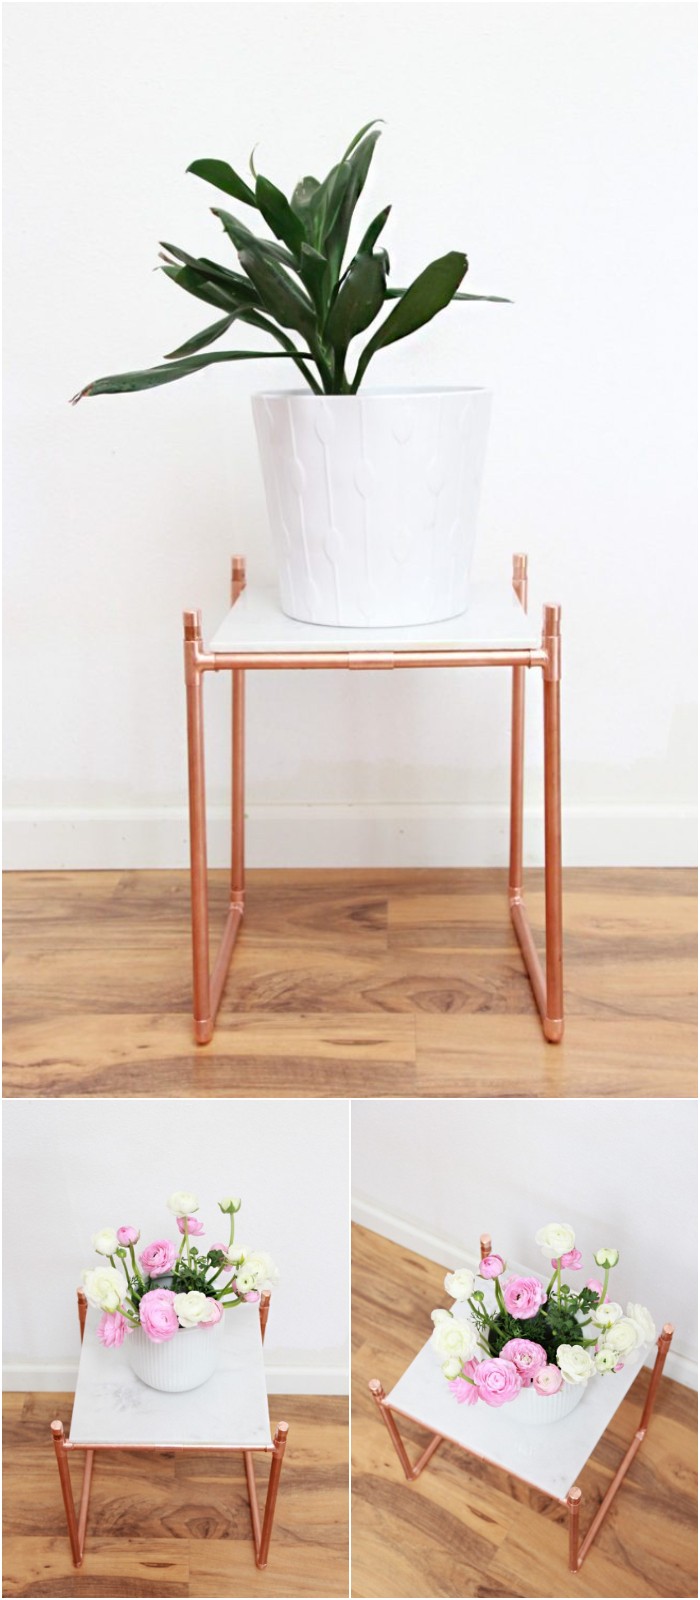 DIY Copper Pipe Marble Plant Stand